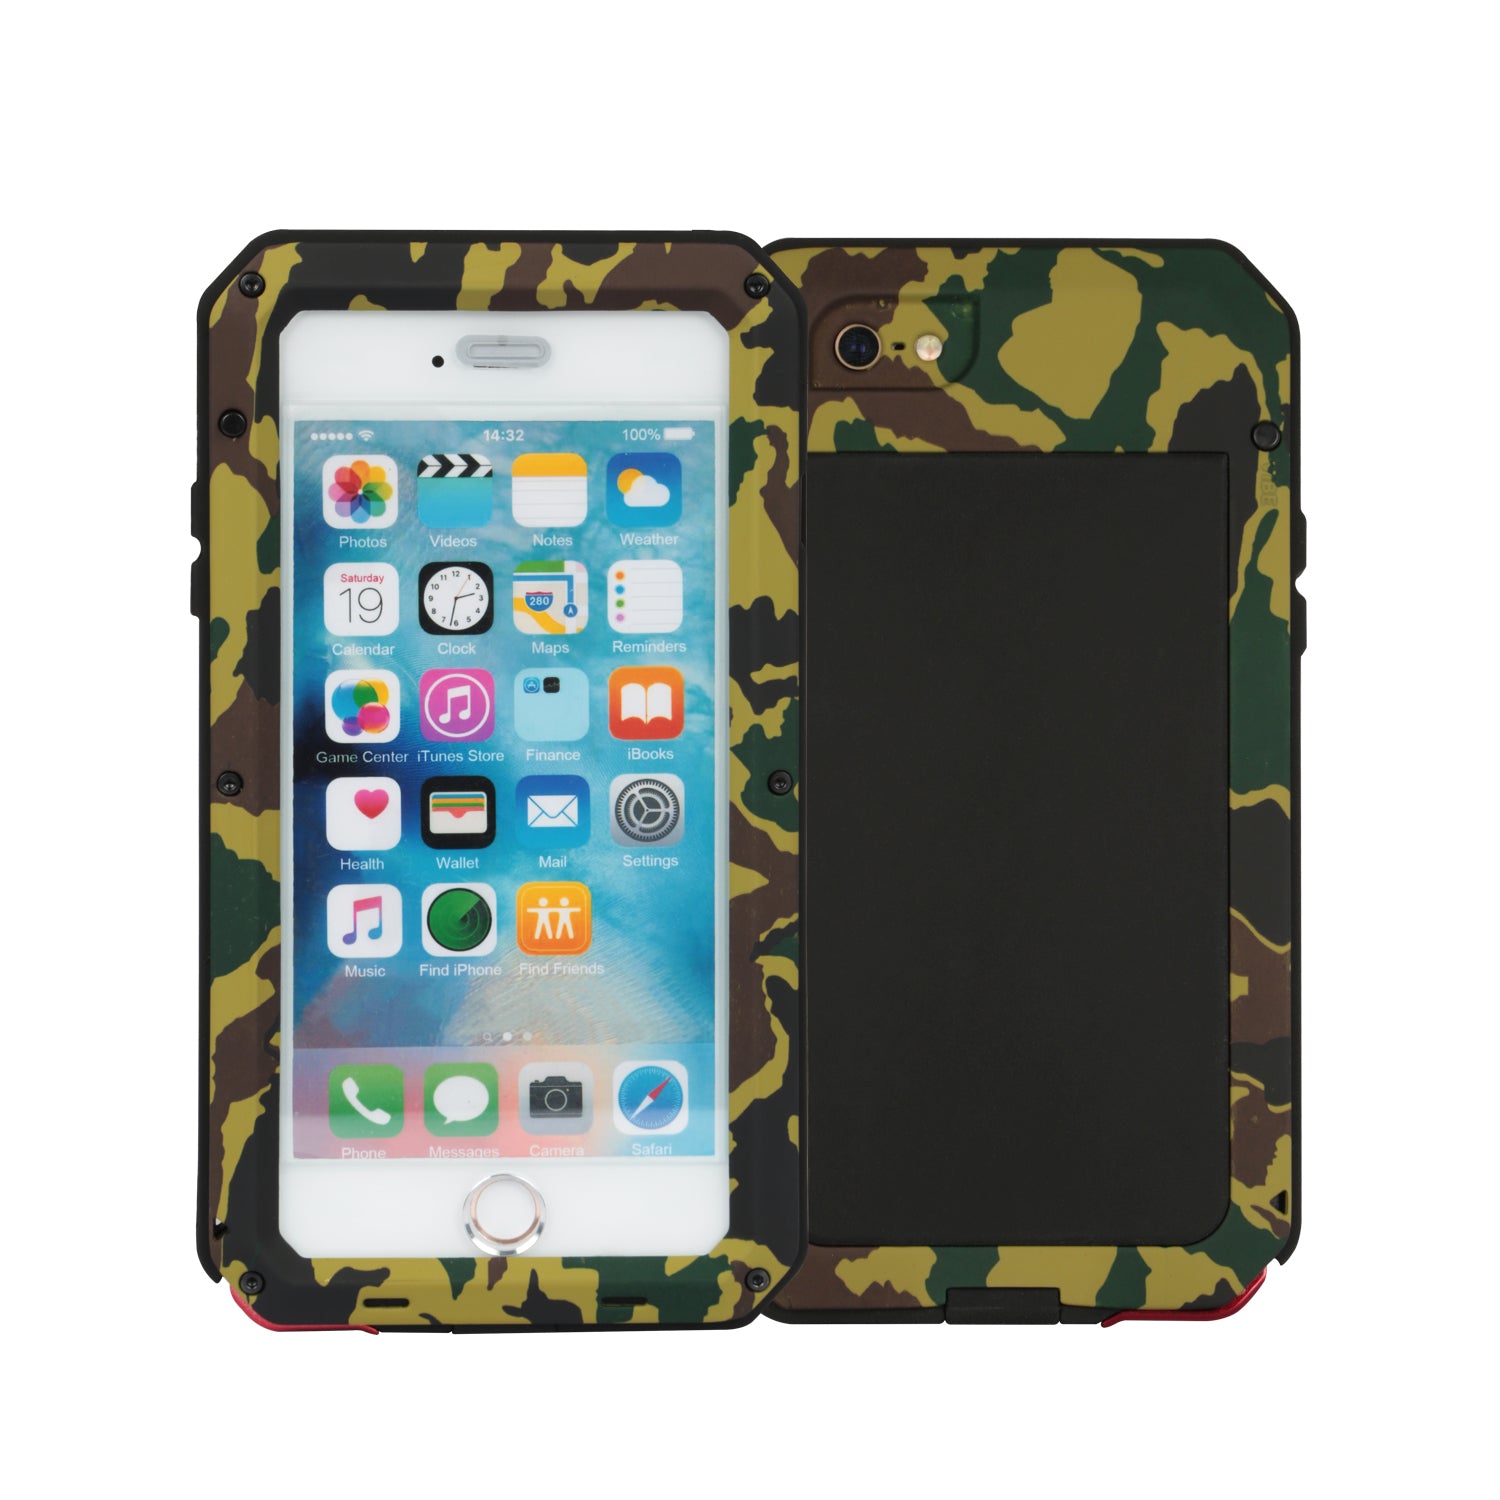 title:Rugged Shock-Resistant Hybrid Full Cover Case For iPhone 6 Plus;color:Camouflage